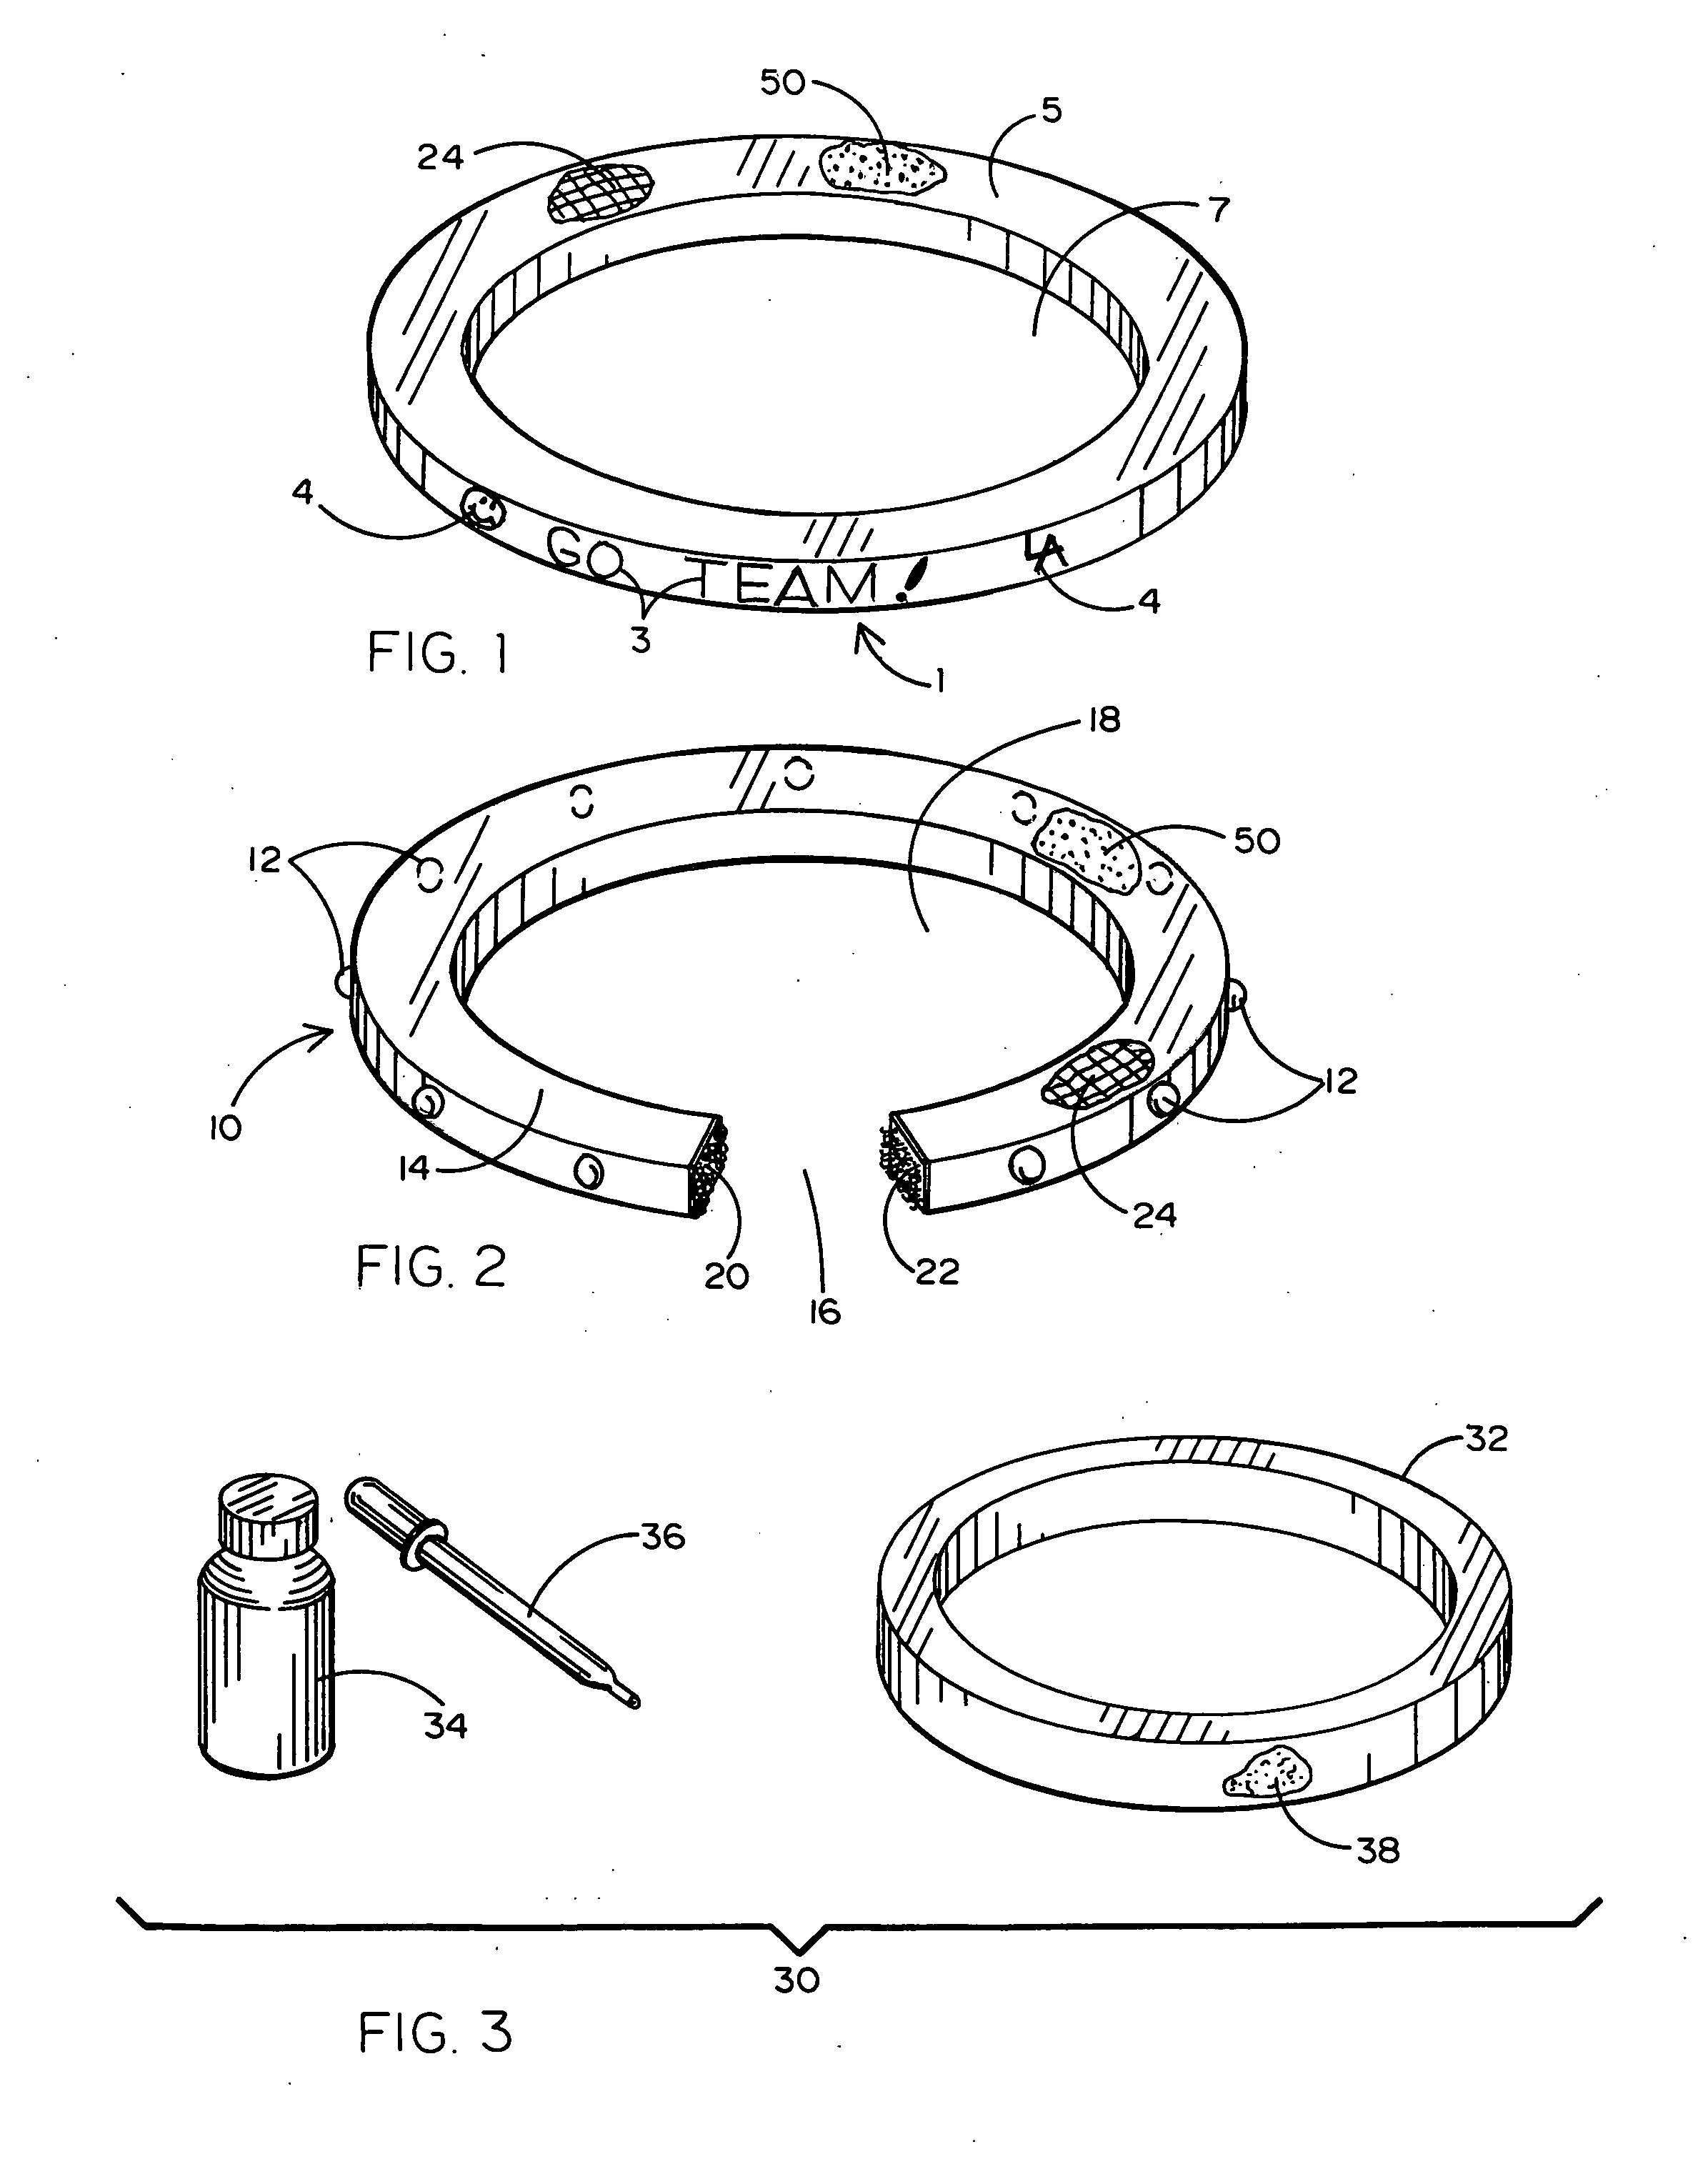 Band, bracelet or strip carrier for an anti-microbial agent to reduce the spread of disease